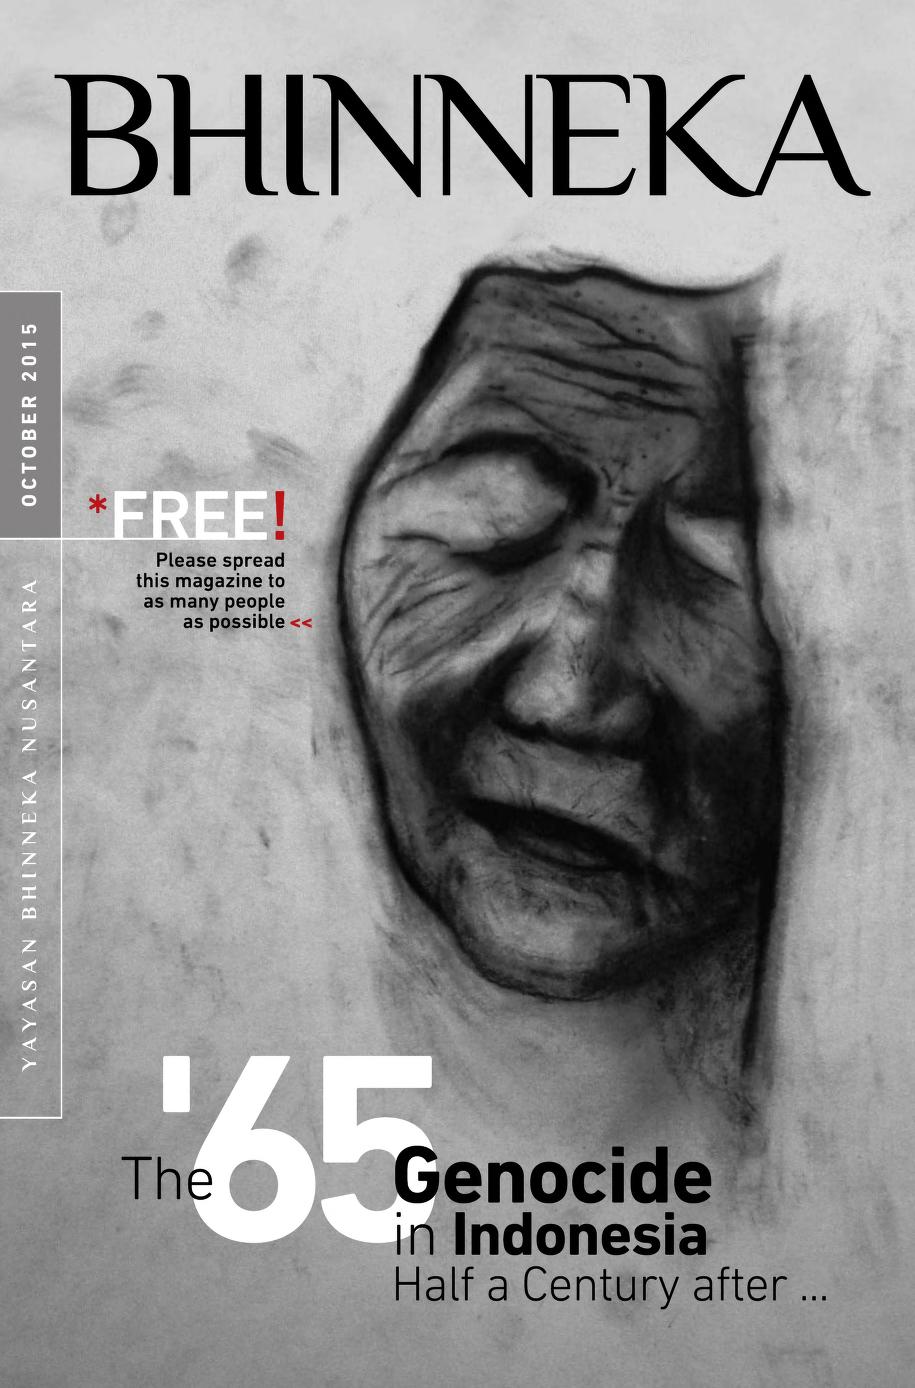 Bhinneka: Special issue on the '65 Genocide in Indonesia, Half a Century Later,  October 2015 ( English)